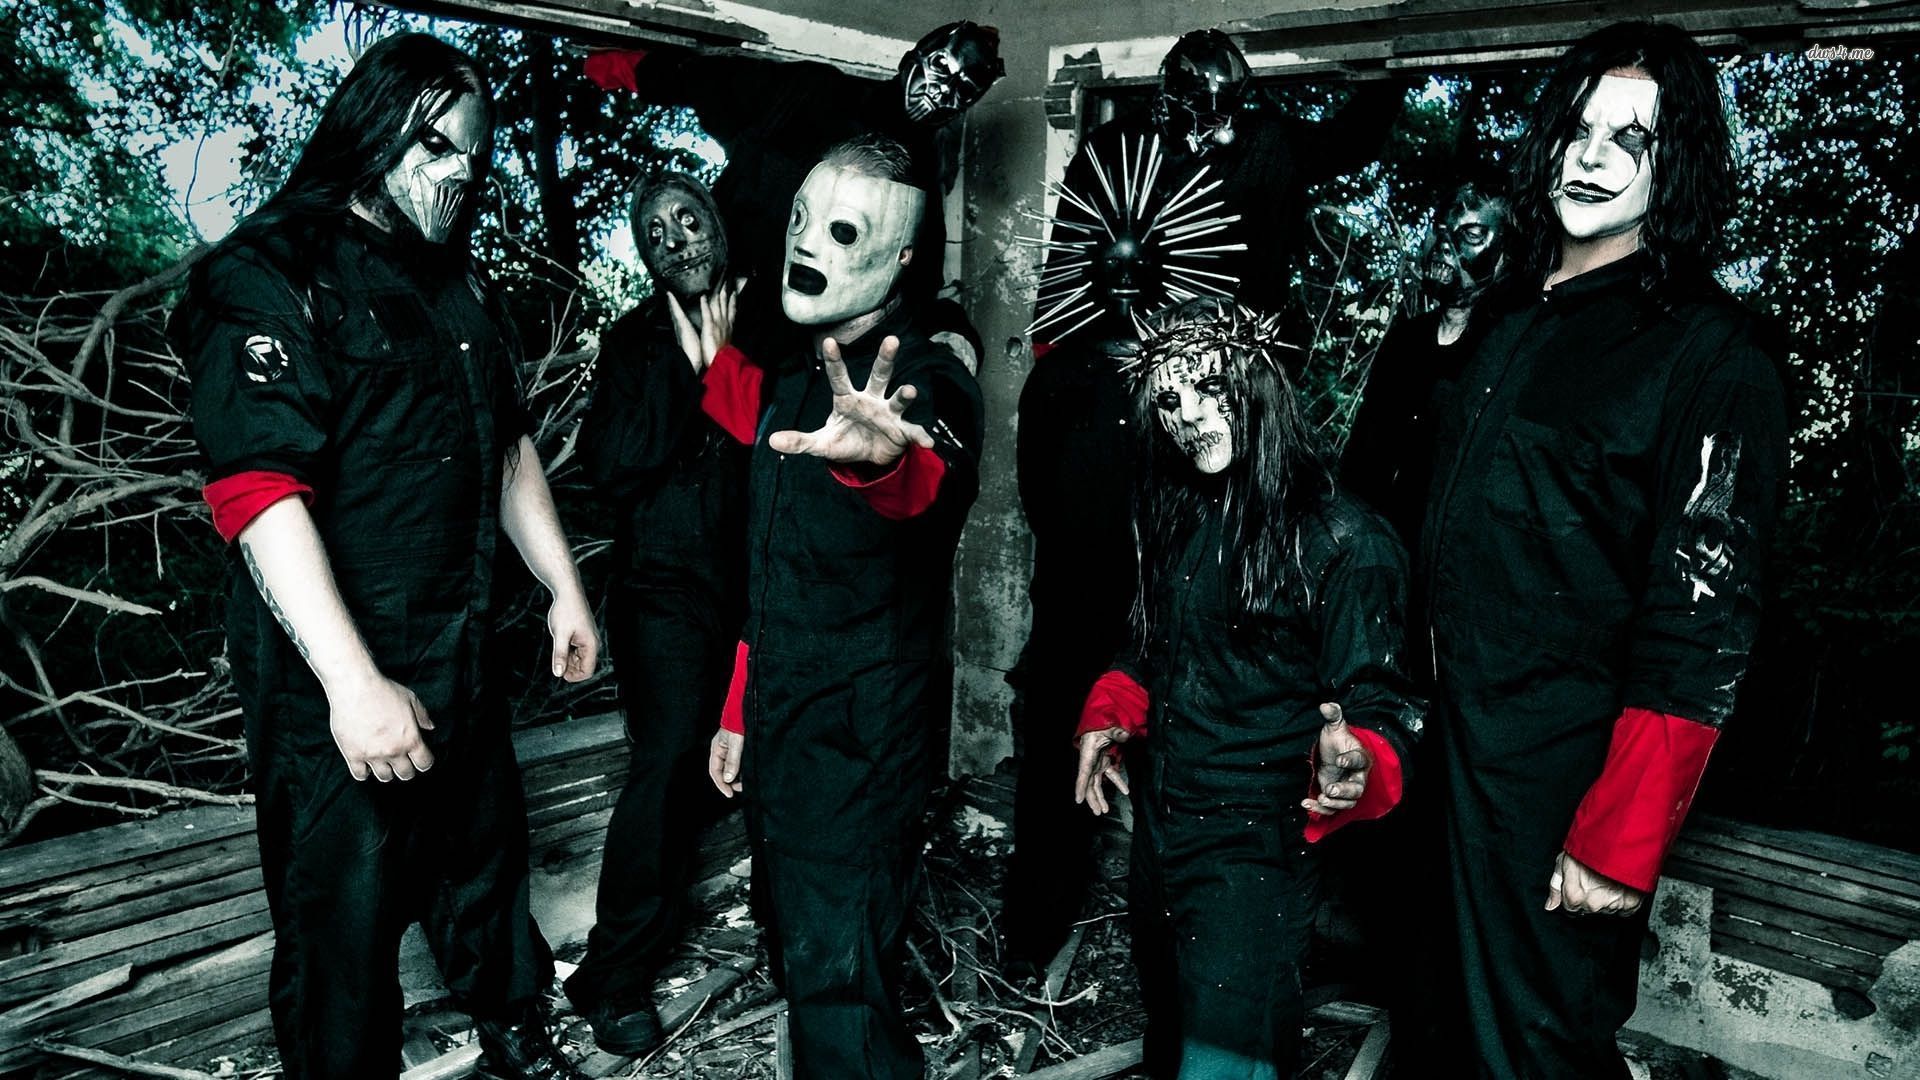 Slipknot Wallpaper And Pictures At